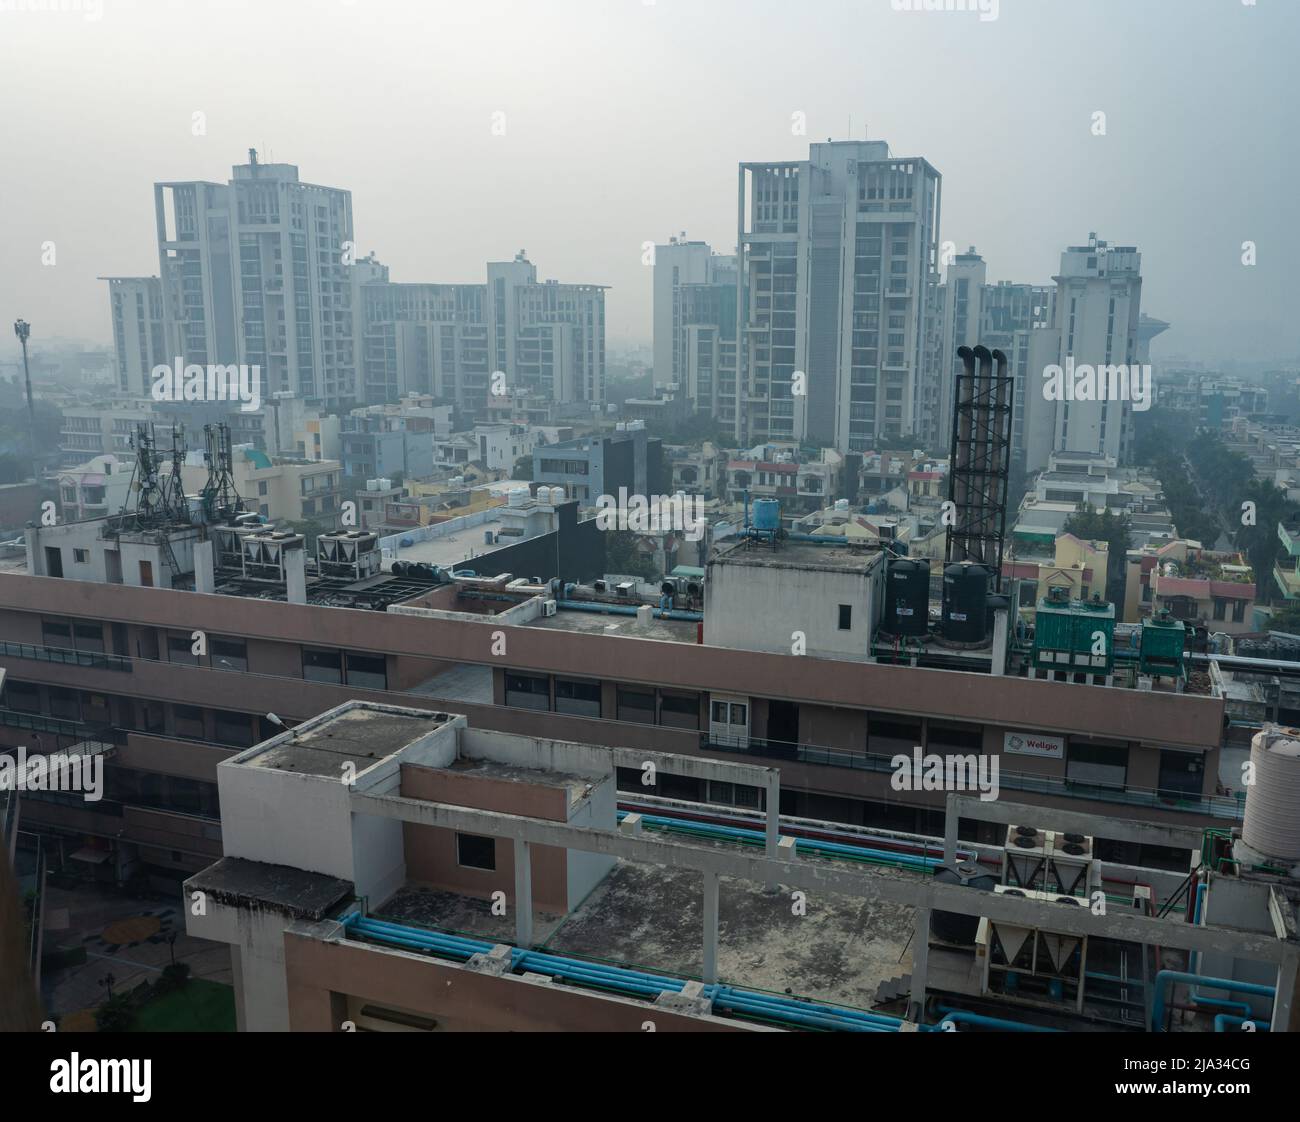 A cityscape morning view at Baani Square shows very poor visibility due to increased air pollution. Stock Photo